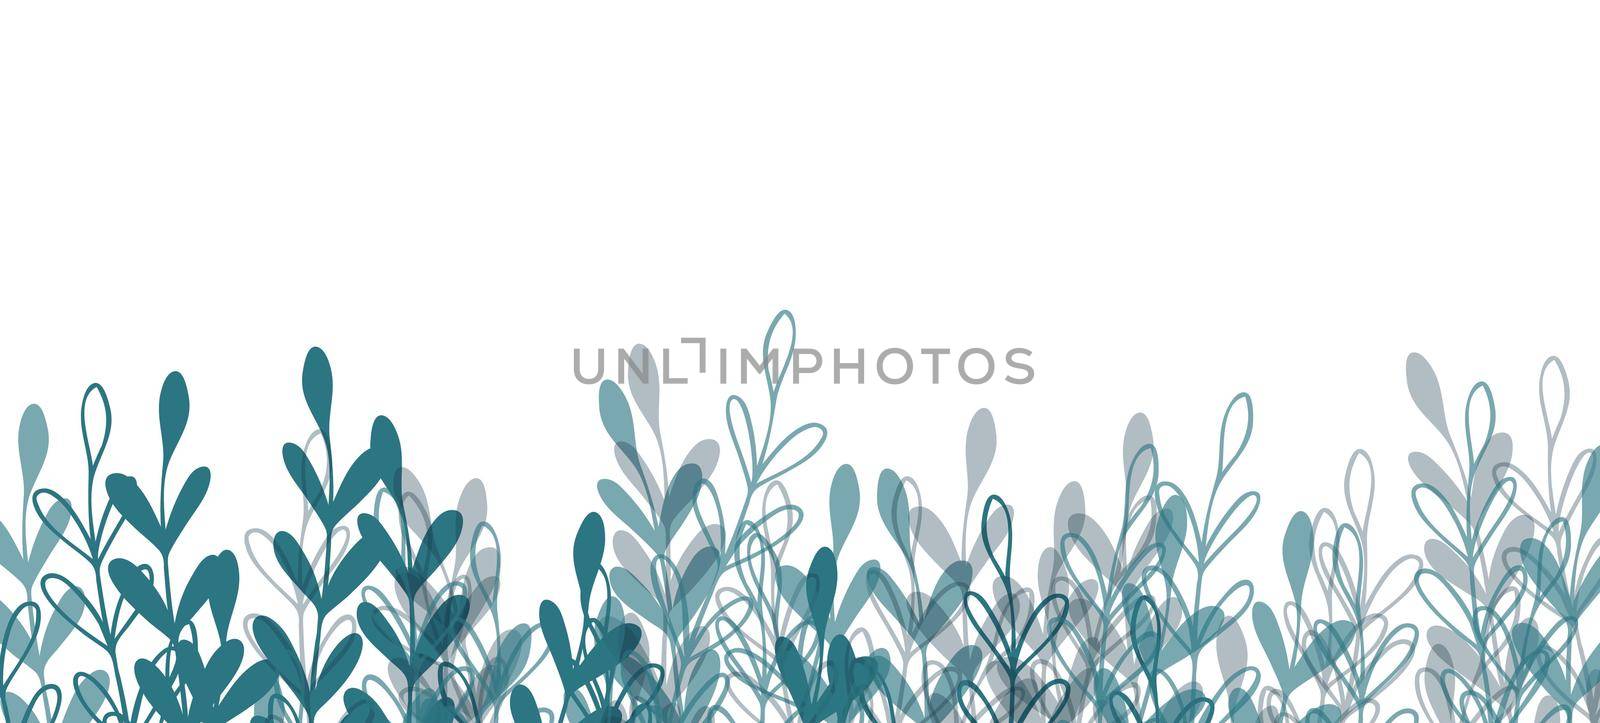 Floral web banner with drawn color exotic leaves. Nature concept design. Modern floral compositions with summer branches. Vector illustration on the theme of ecology, natura, environment. Copy space.